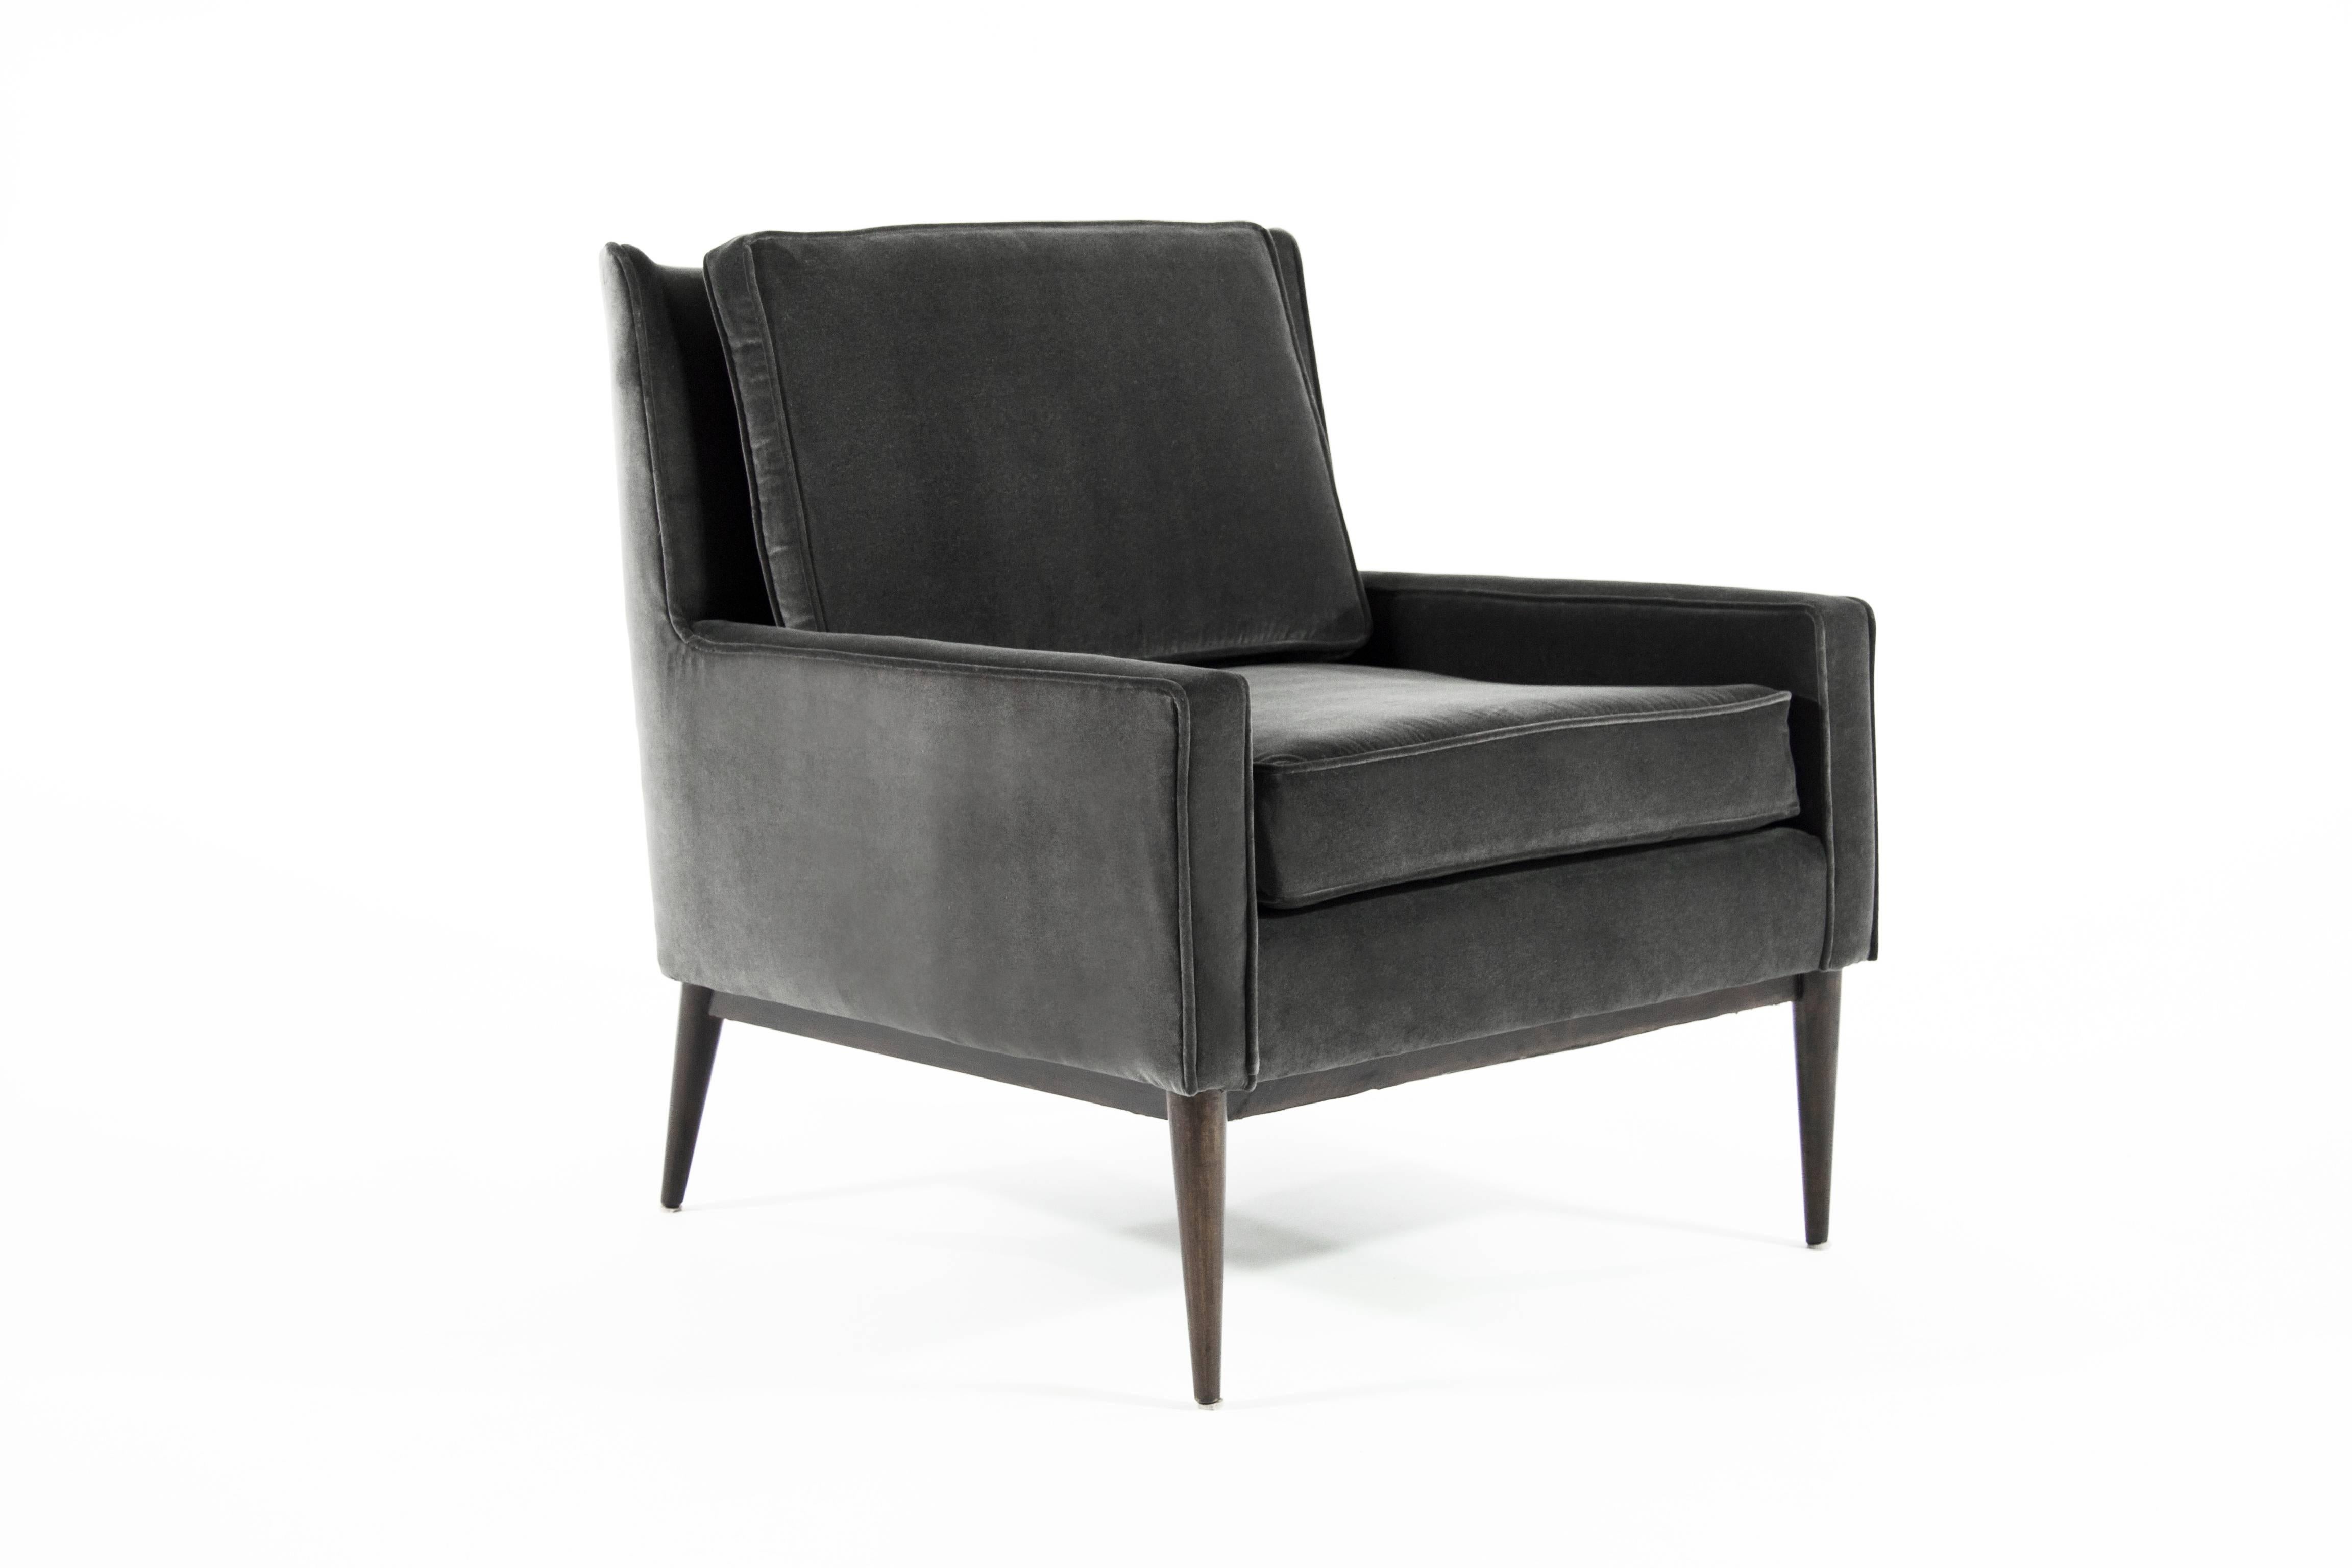 A Paul McCobb Classic, model 1312 lounge chair and ottoman for Directional, circa 1950s. Base fully restored, newly upholstered in graphite cotton velvet.

Ottoman dimensions: H 15